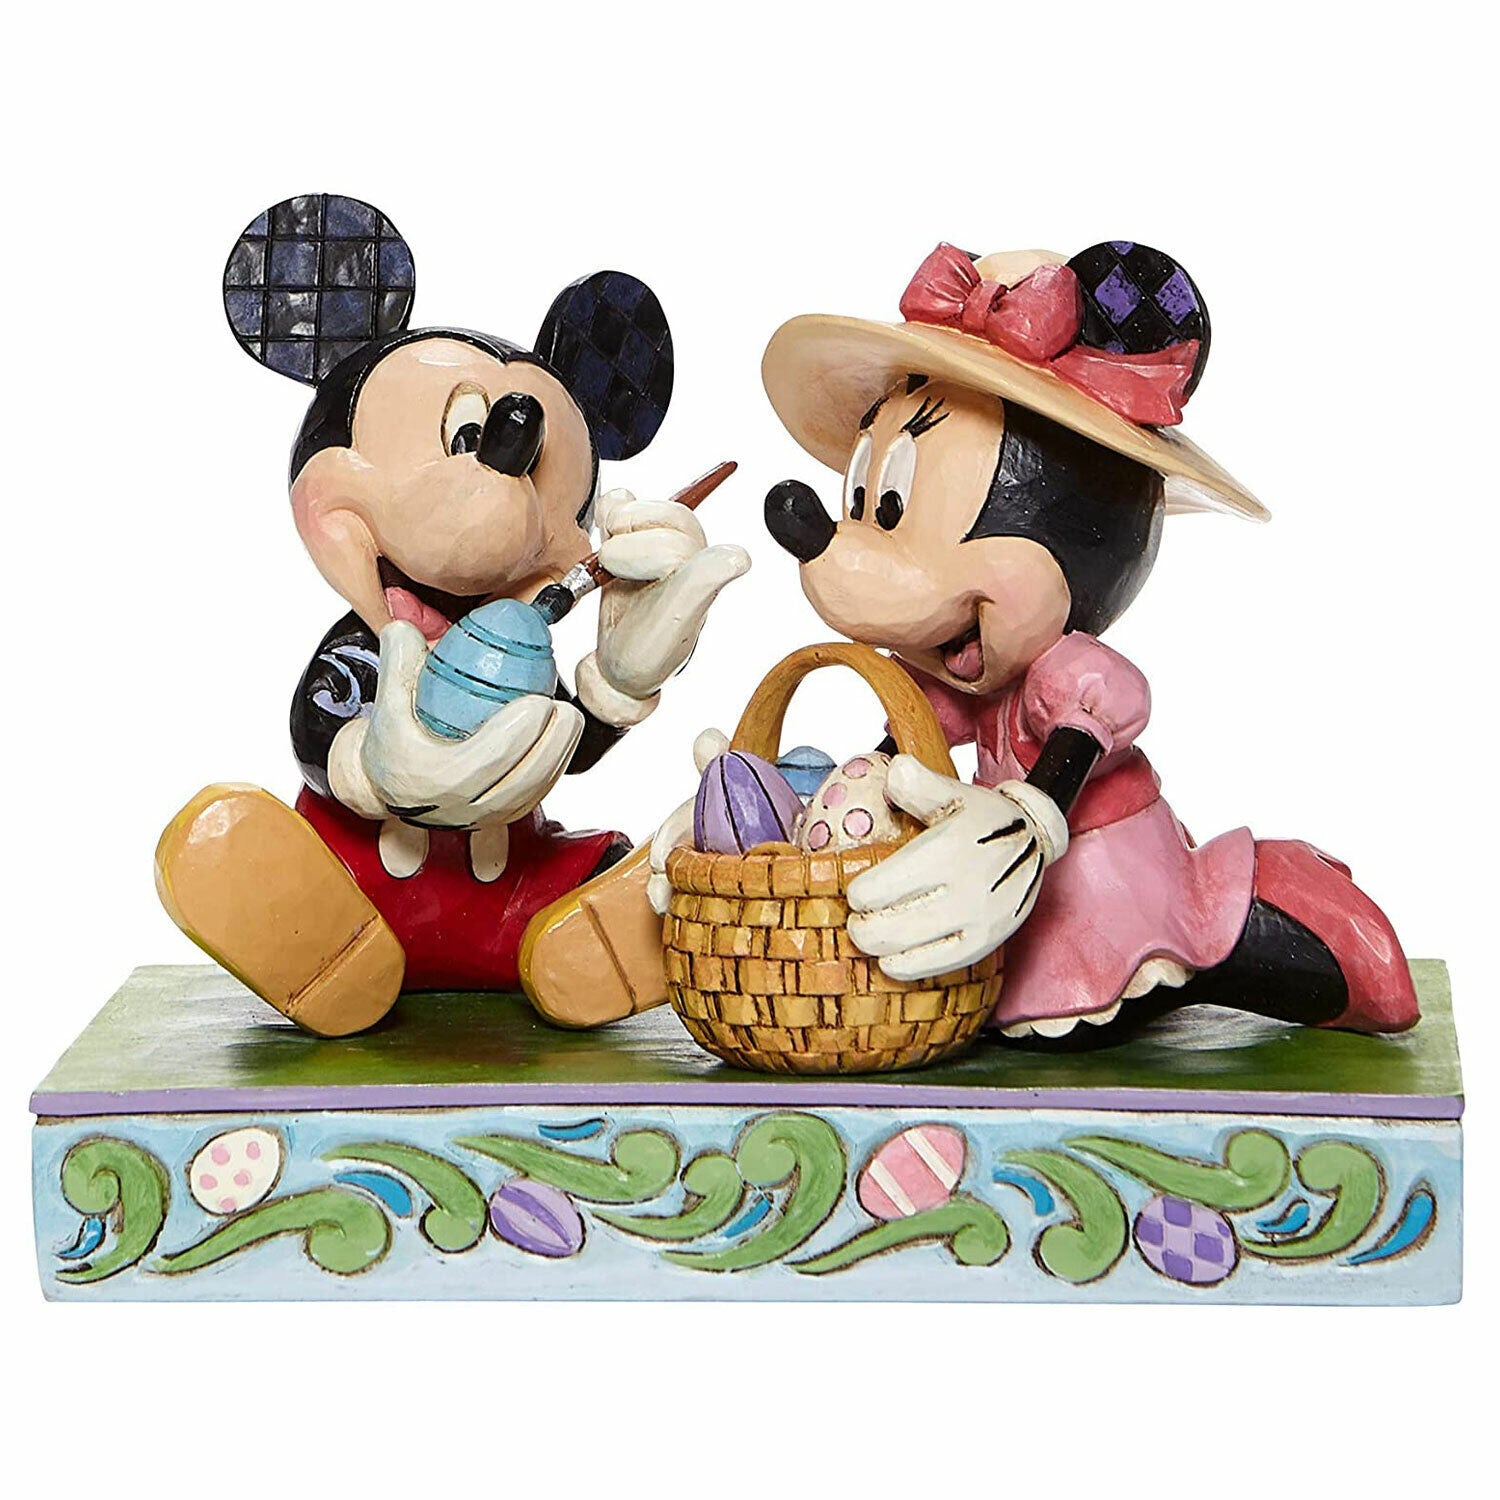 Disney Traditions Easter Artistry Figurine - Mickey and Minnie - Limited Edition